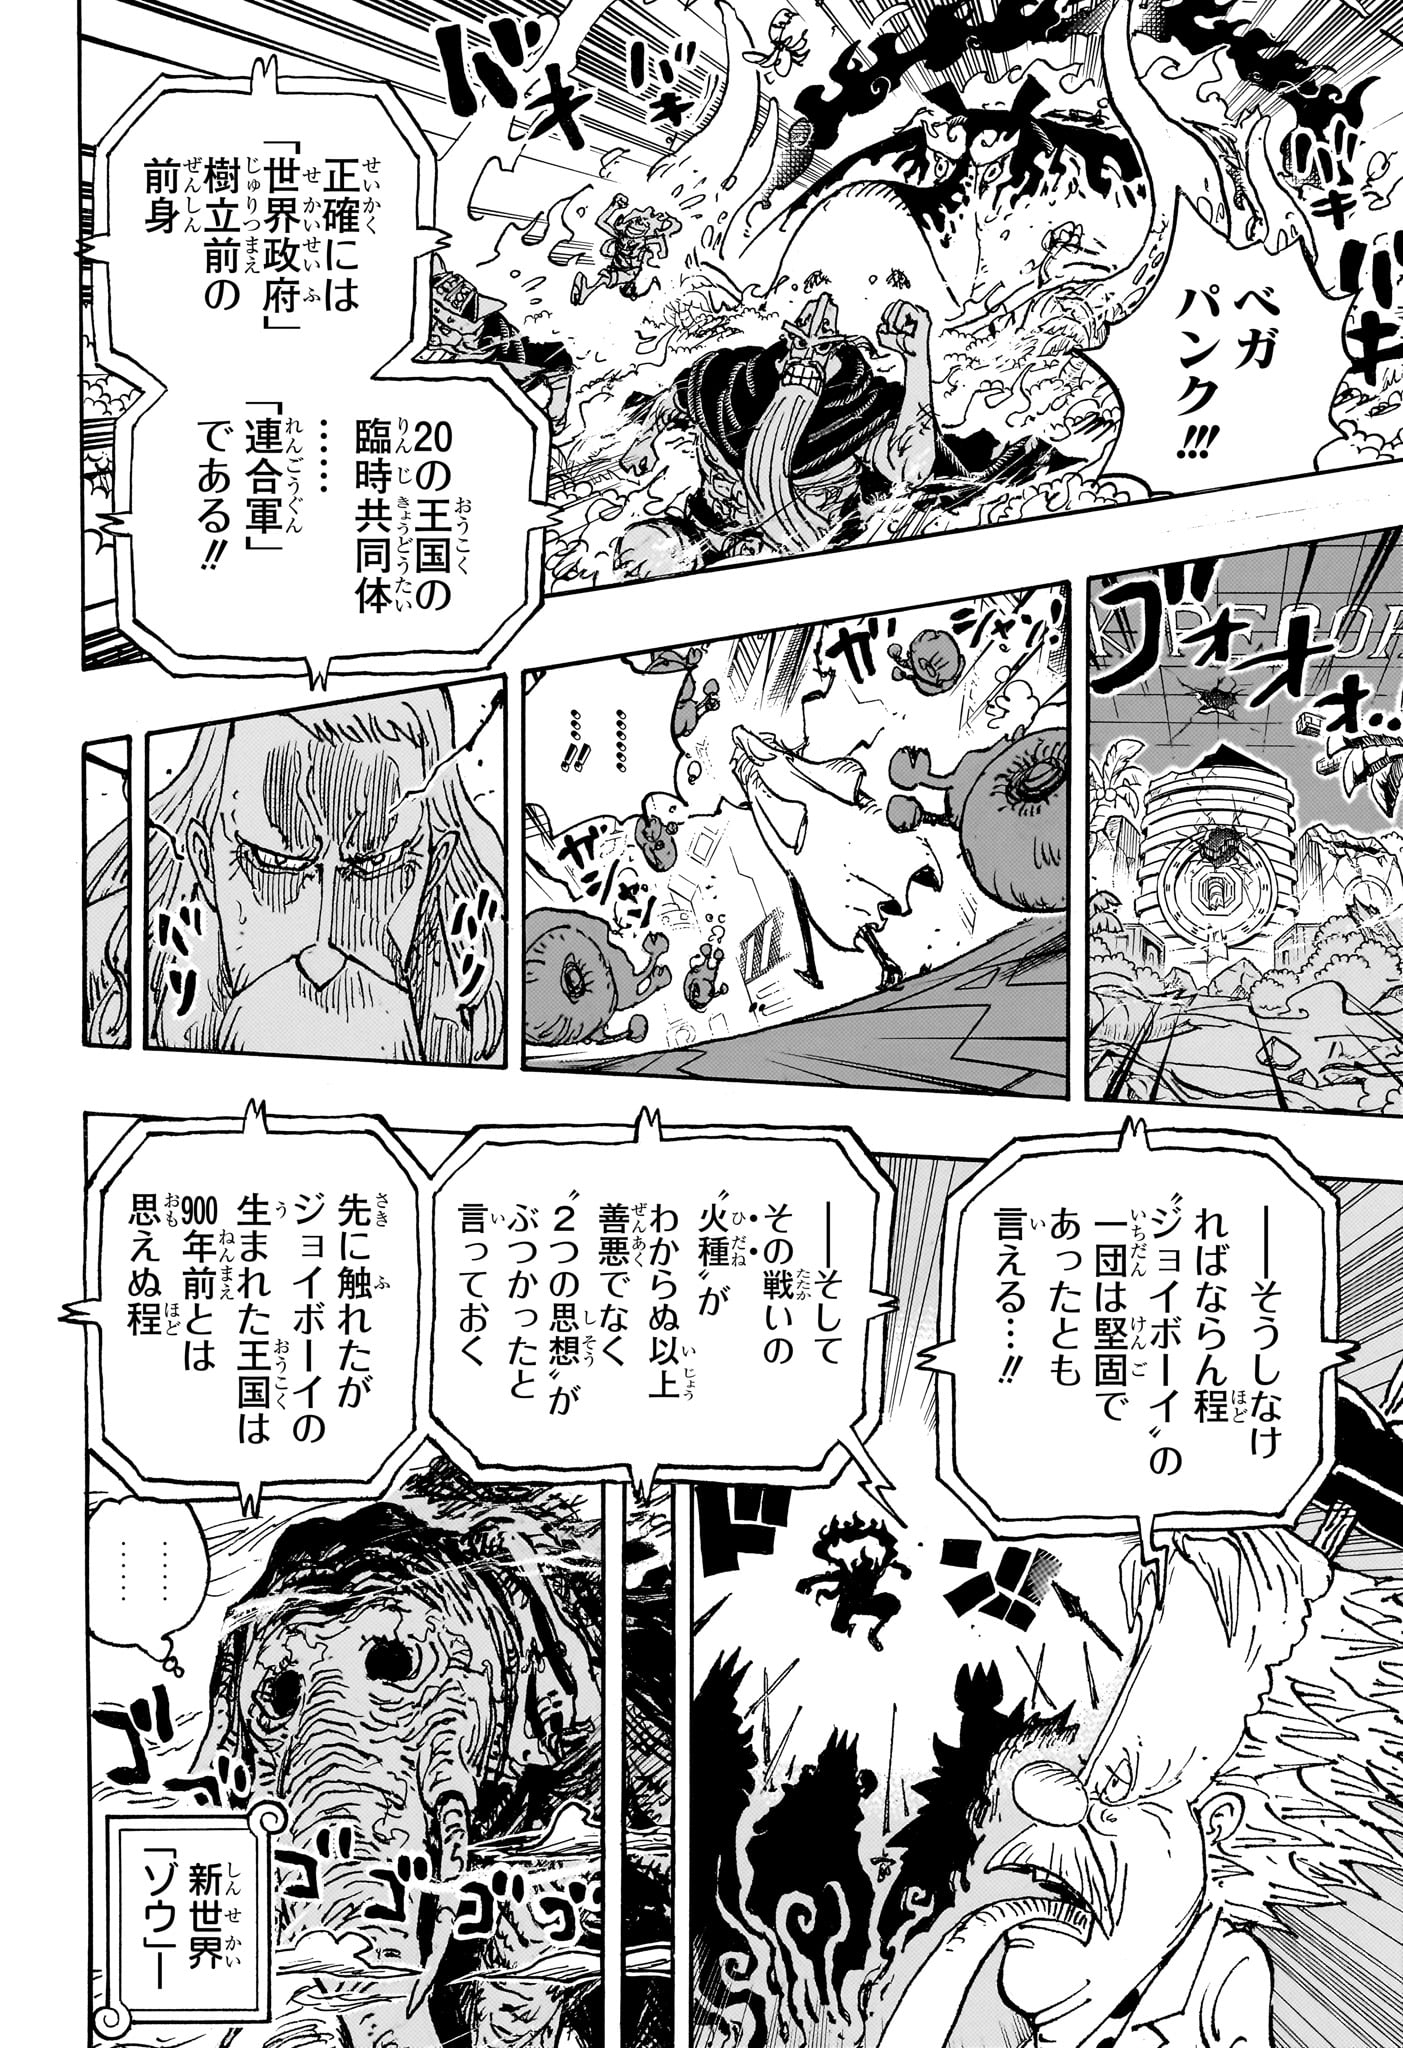 One Piece - Chapter 1115 - Page 4